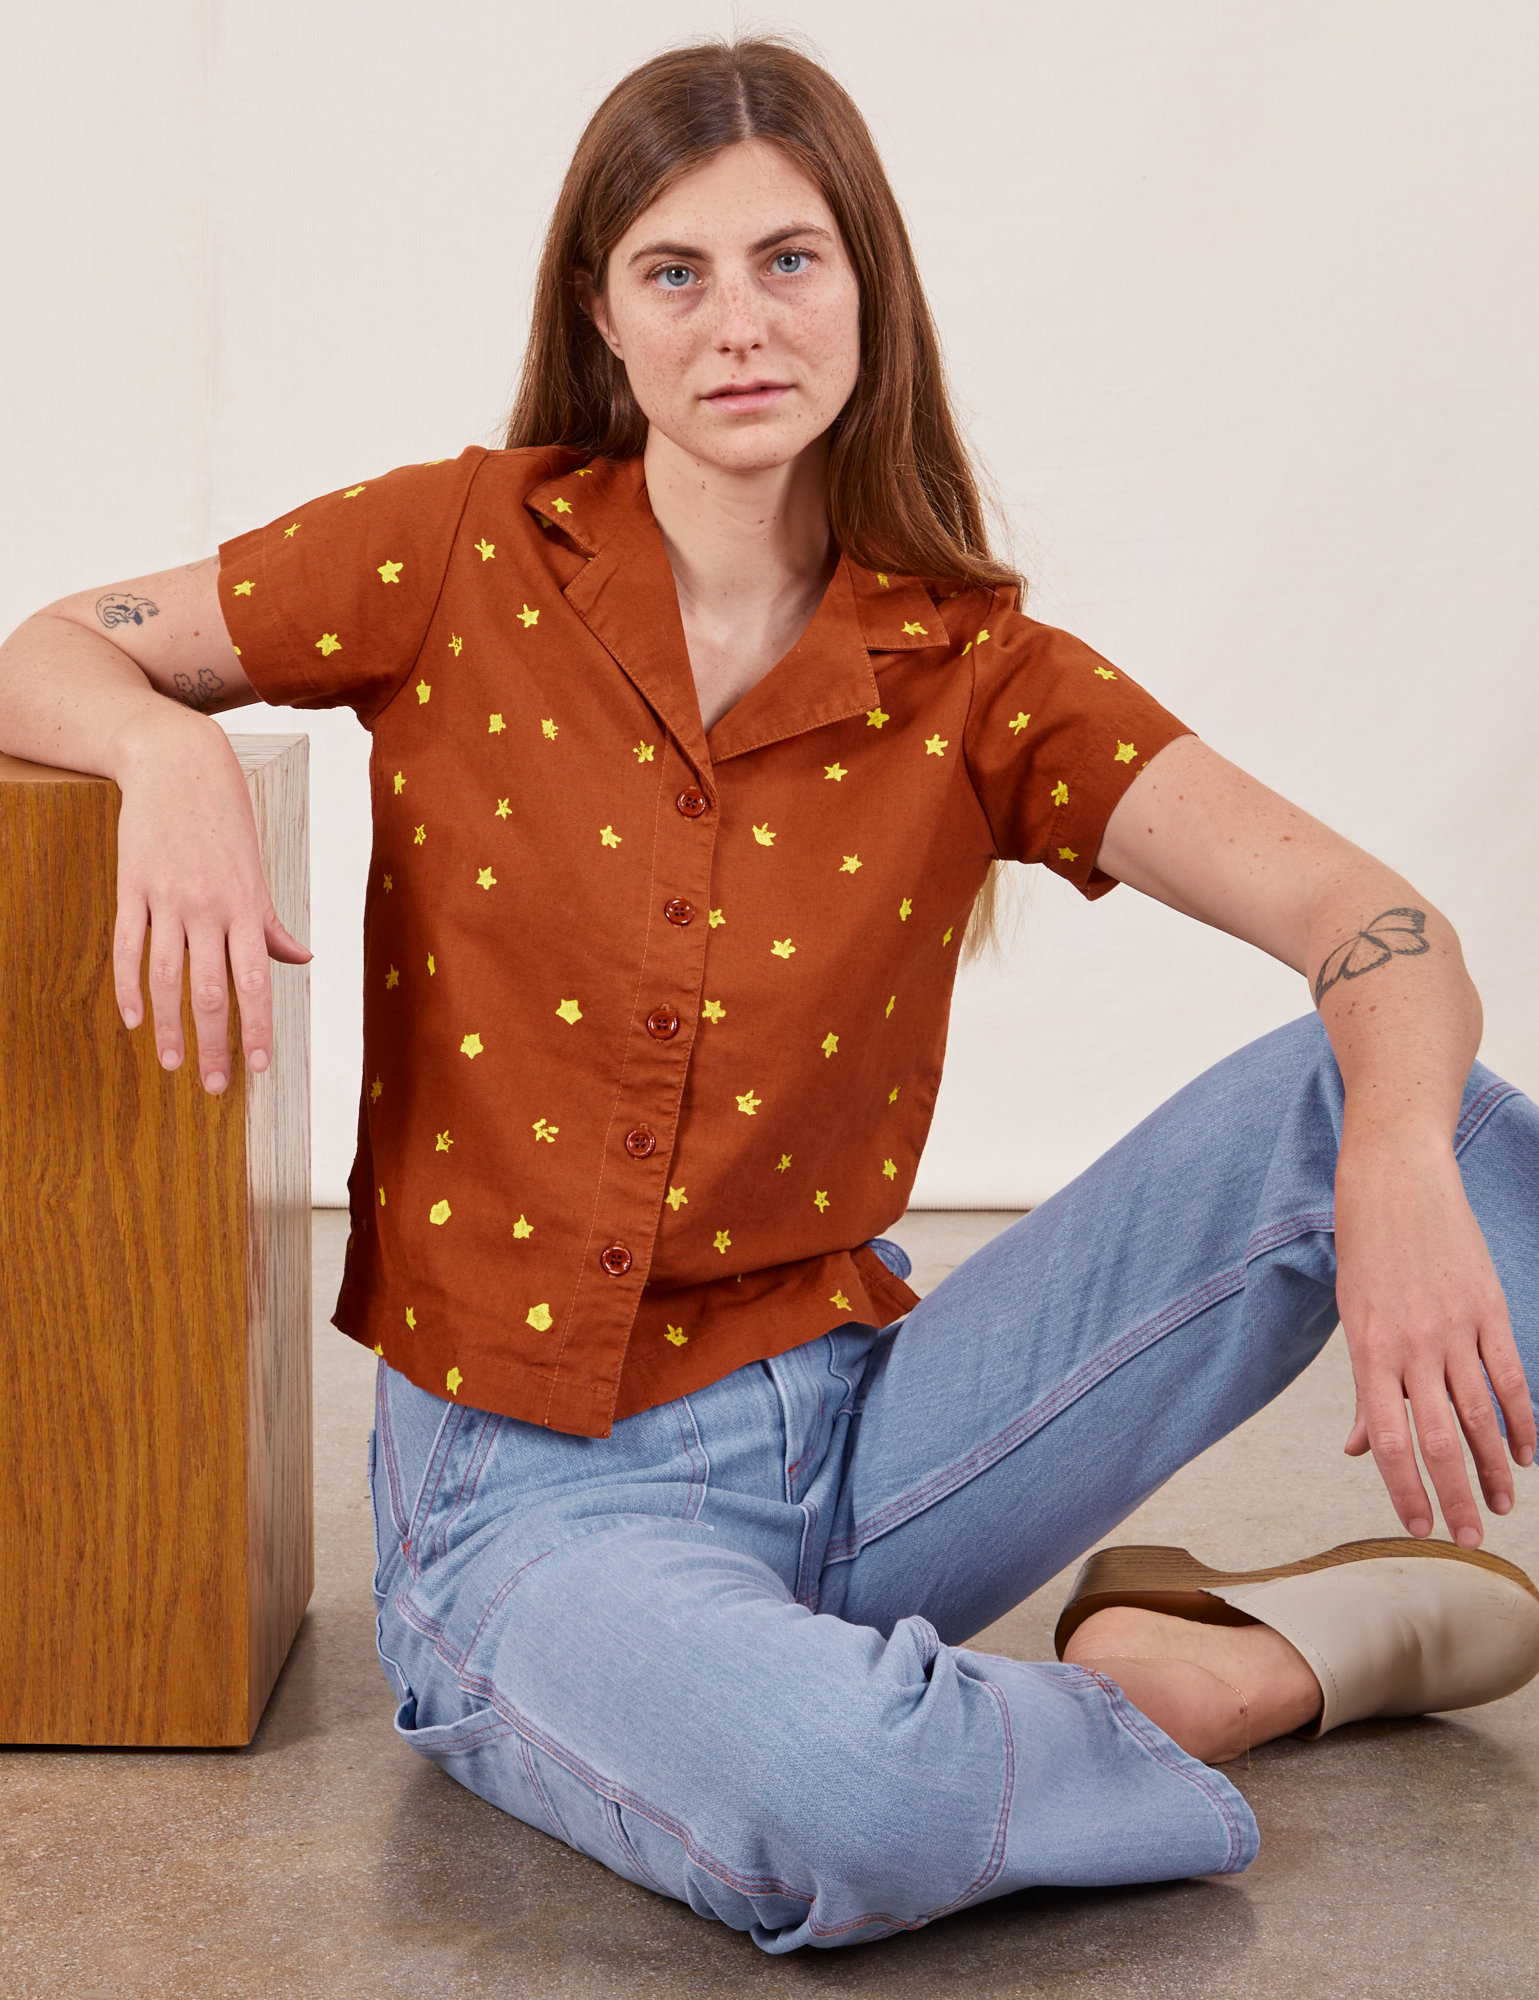 Scarlett is 5'9" and wearing P Icon Pantry Button-Up in Stars paired with light wash Carpenter Jeans